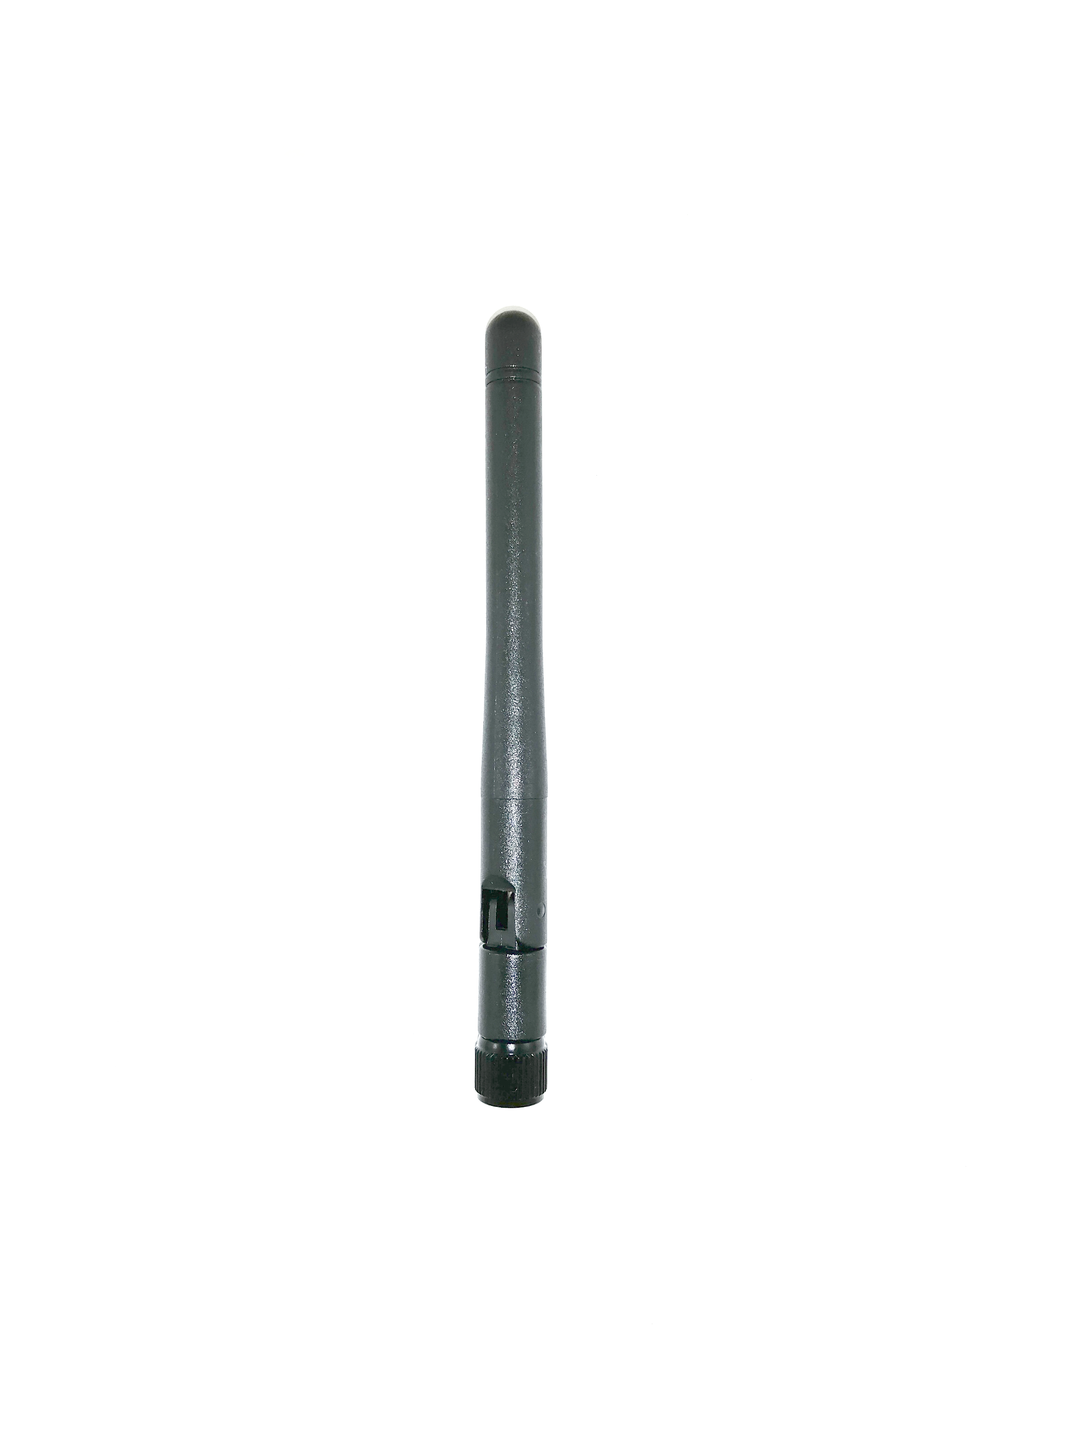 +2 dBi Replacement Antenna for Dani and Streetheart